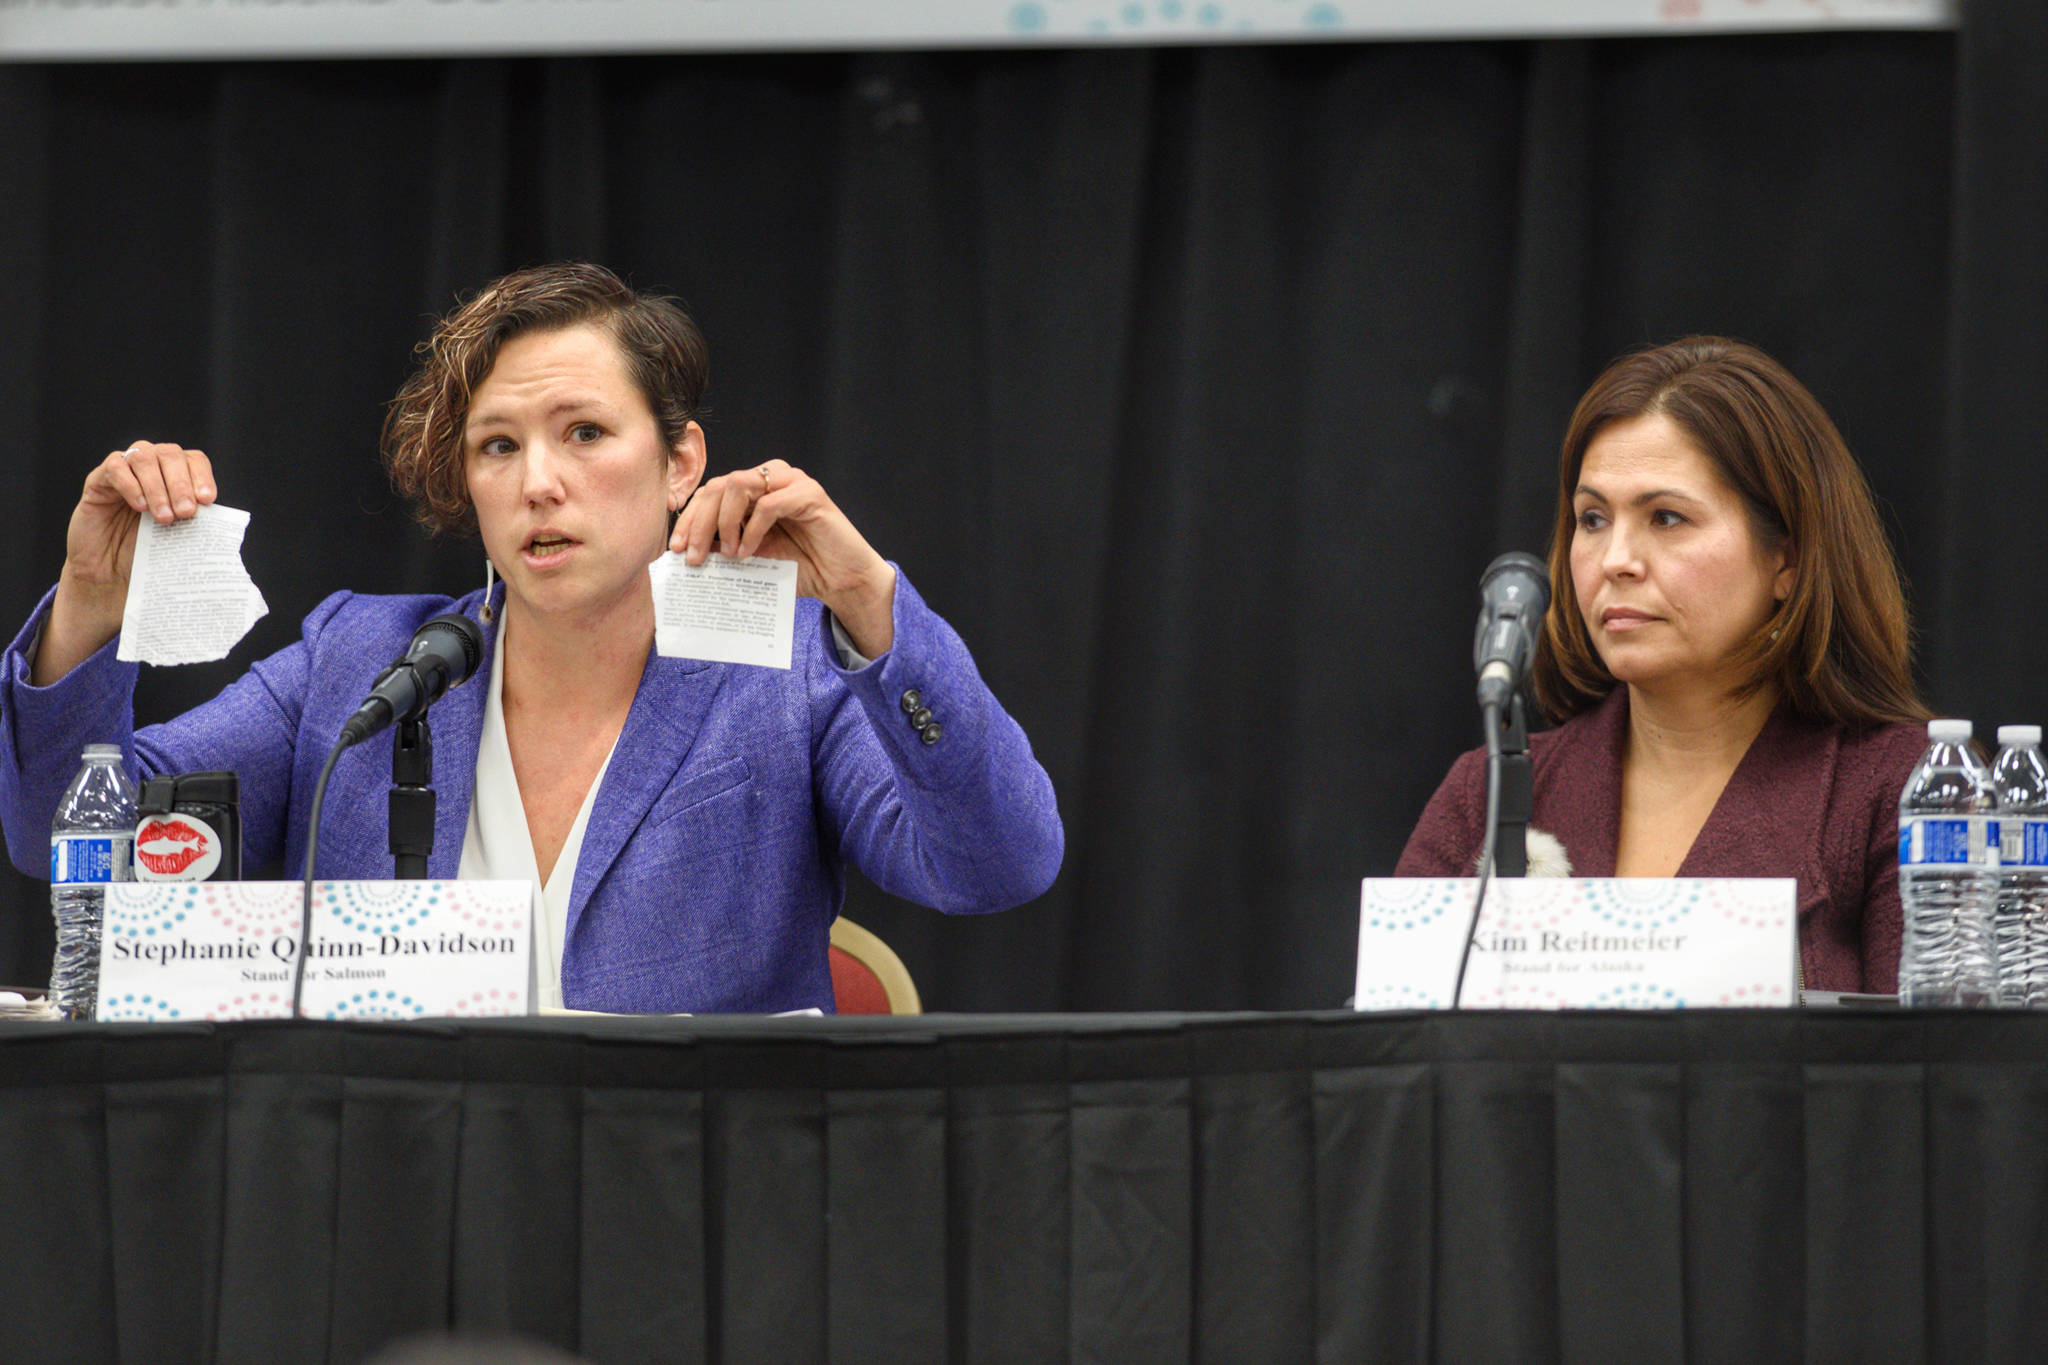 Stephanie Quinn-Davidson, left, of Yes for Salmon, holds up what she says is habitat protection regulation as she debates the merits of Ballot Measure 1 with Kim Reitmeier, representing Stand for Alaska, during a Get Out the Native Vote Southeast forum at Elizabeth Peratrovich Hall on Tuesday, Oct. 9, 2018. (Michael Penn | Juneau Empire)